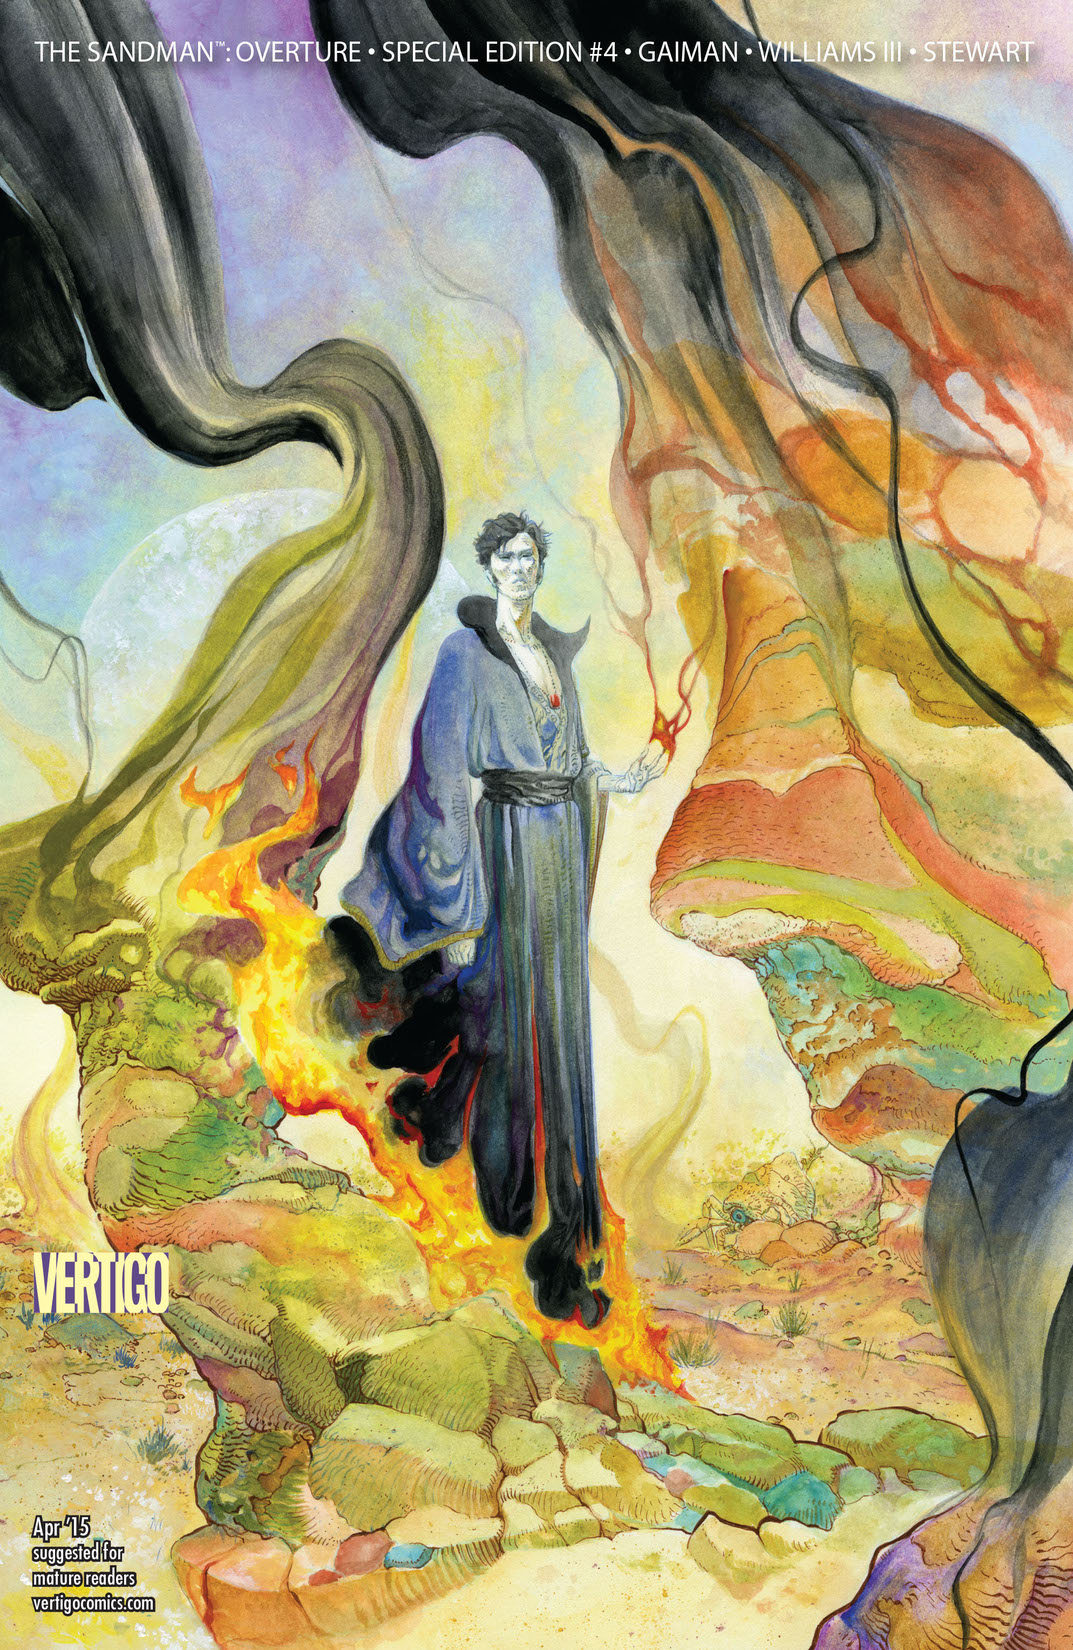 The Sandman: Overture Special Edition #4 preview images